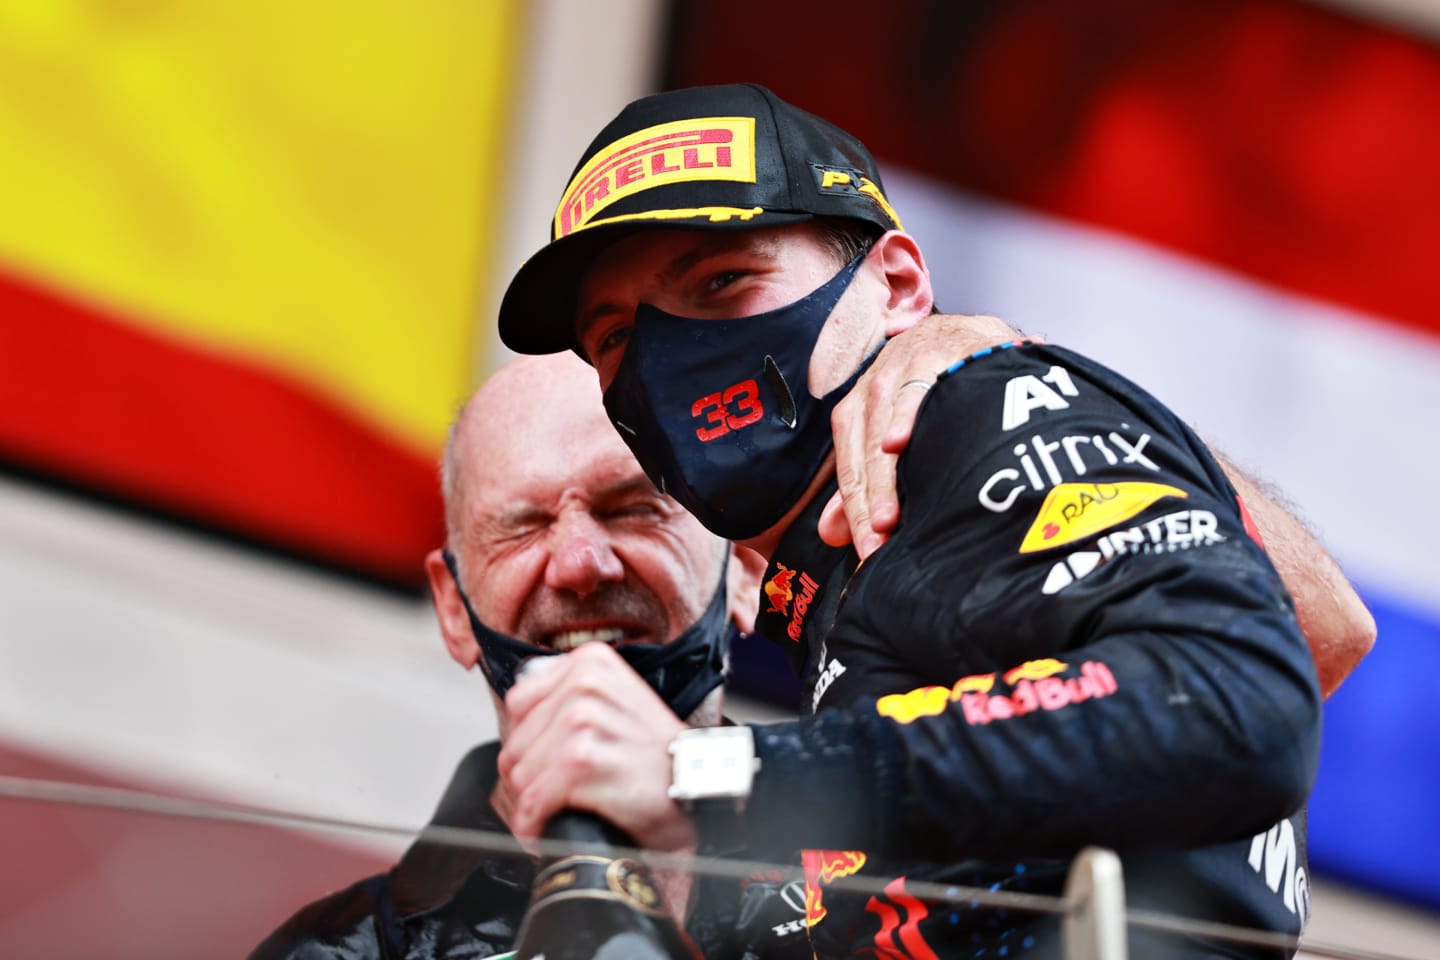 MONTE-CARLO, MONACO - MAY 23: Race winner Max Verstappen of Netherlands and Red Bull Racing and Adrian Newey, the Chief Technical Officer of Red Bull Racing celebrate on the podium during the F1 Grand Prix of Monaco at Circuit de Monaco on May 23, 2021 in Monte-Carlo, Monaco. (Photo by Mark Thompson/Getty Images)